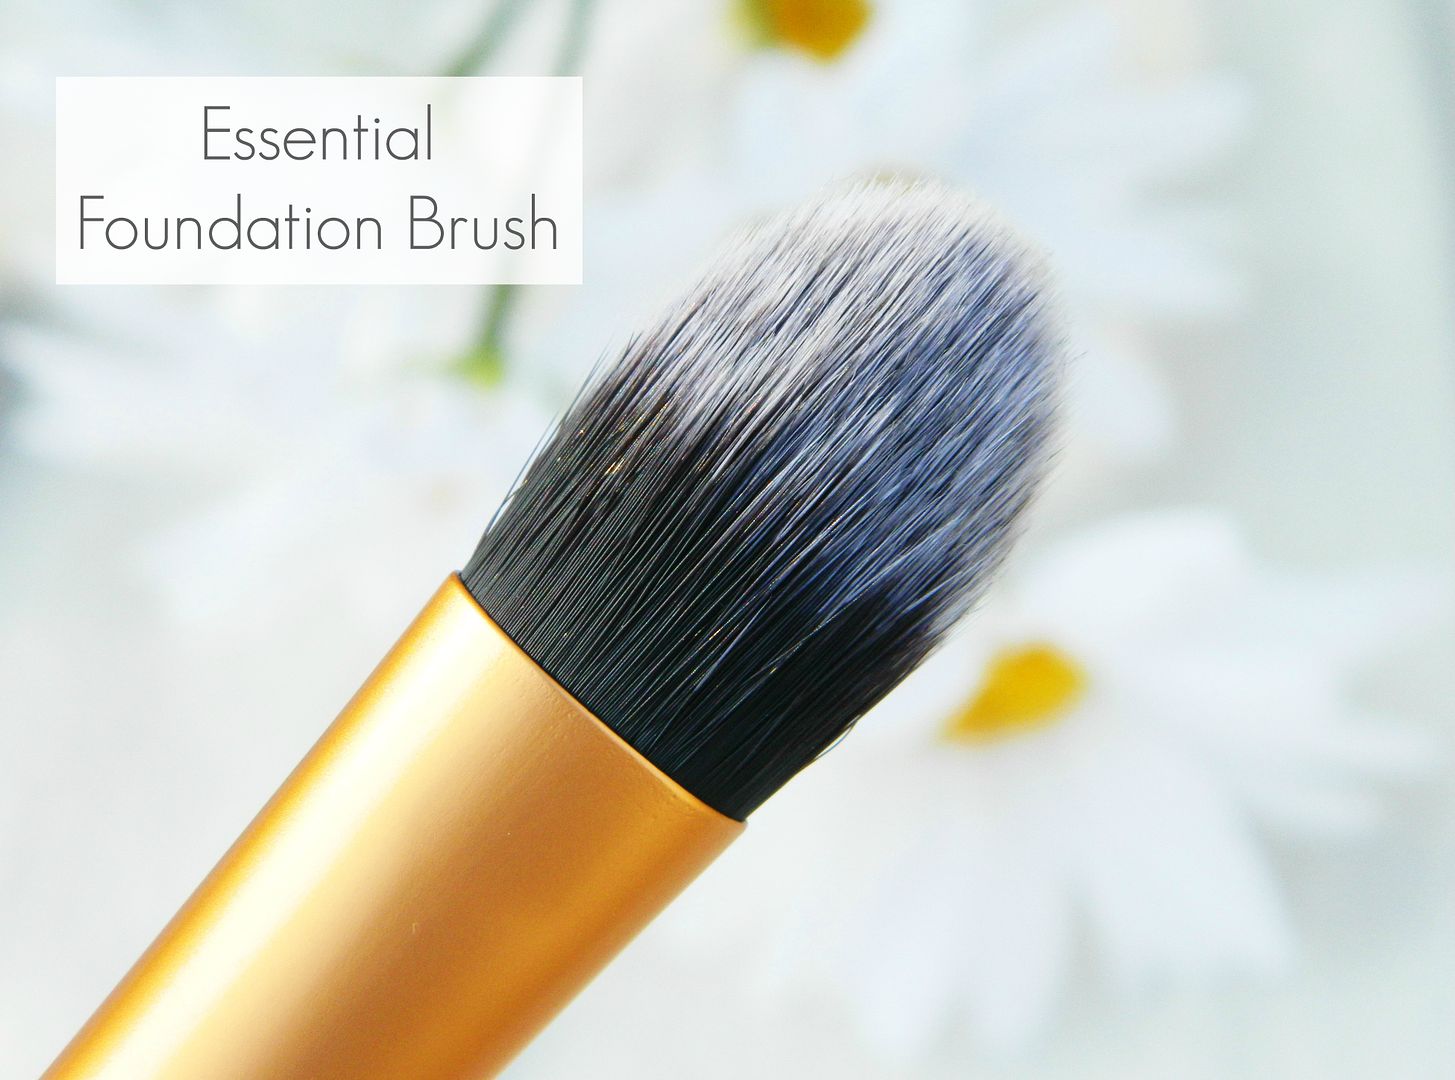 Real Techniques Travel Essentials Brush Set Review Essential Foundation Face Brush Belle-amie UK Beauty Fashion Lifestyle Blog